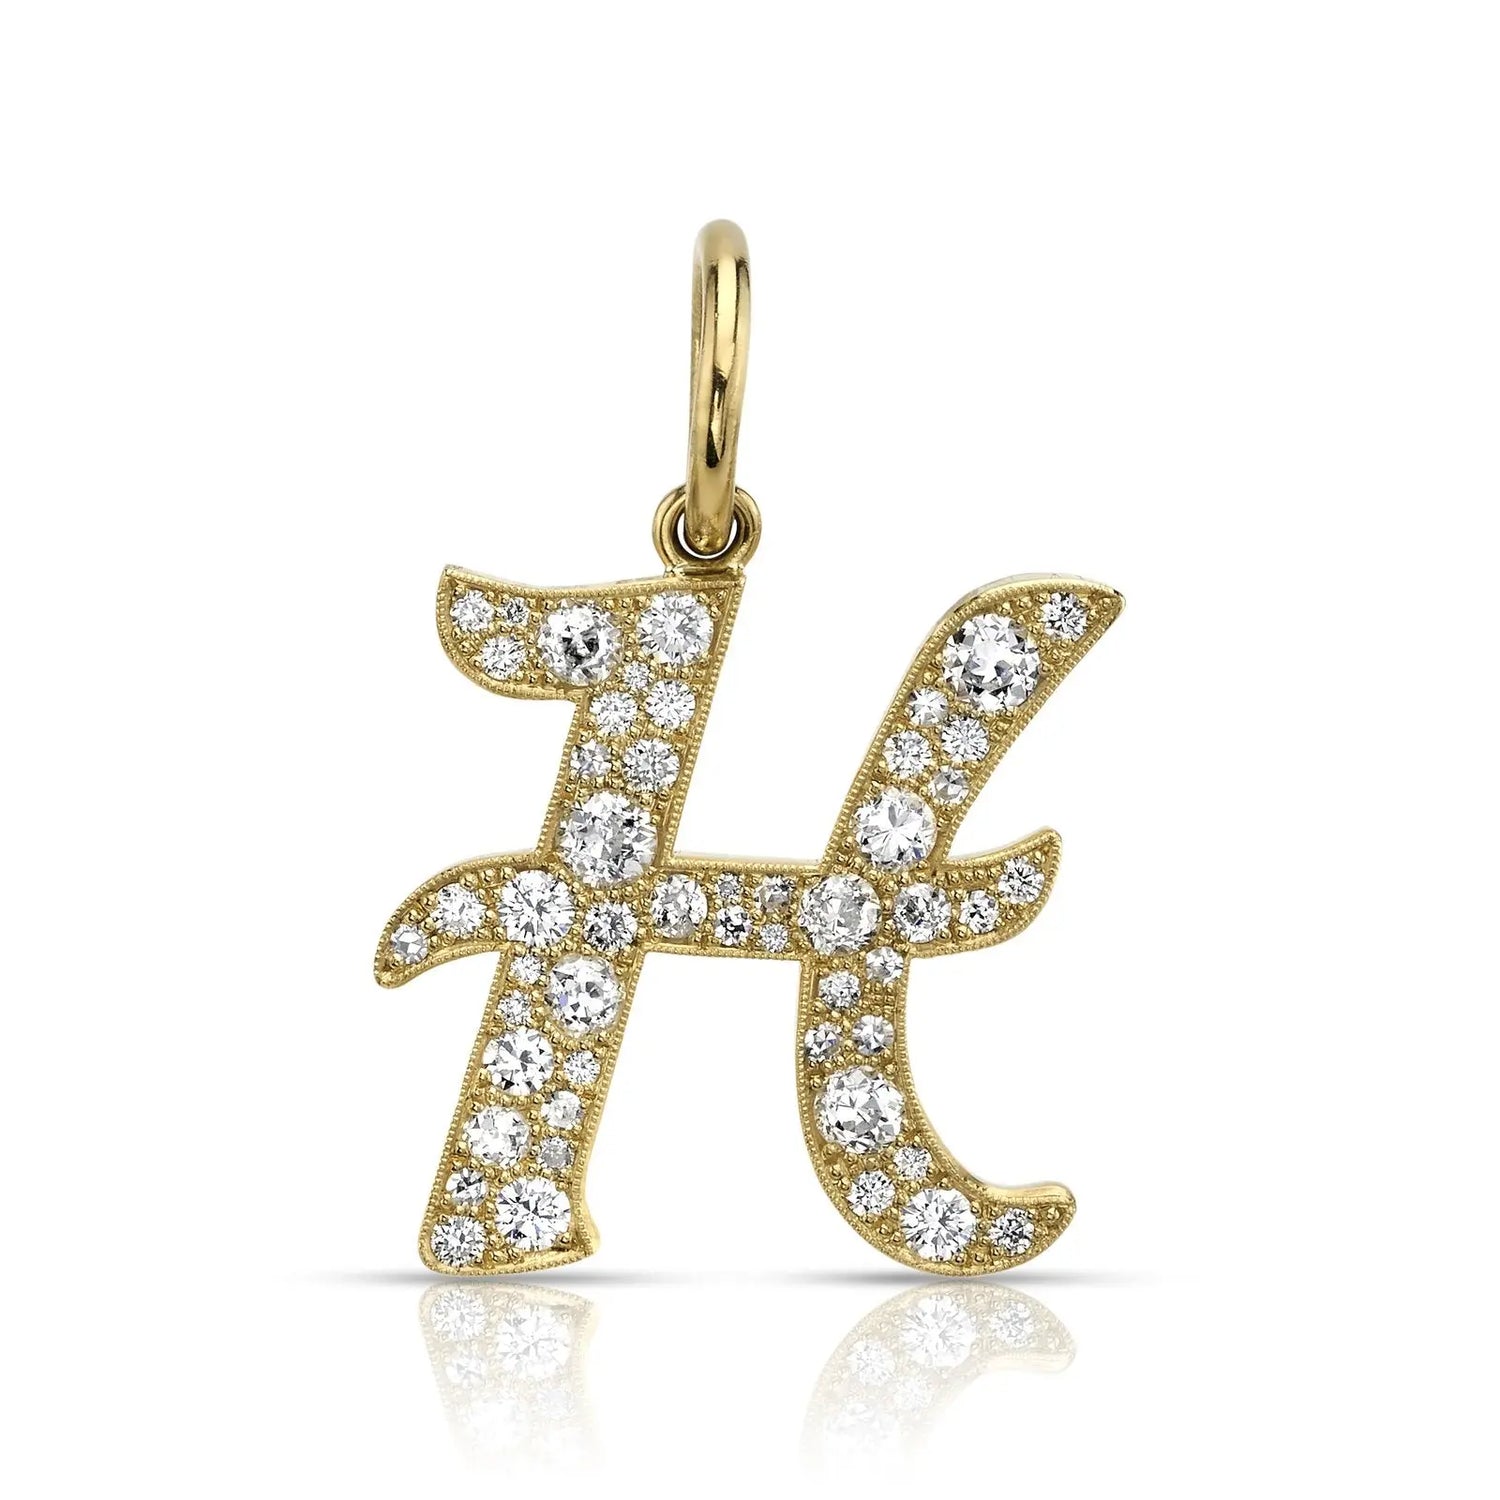 1.83ctw old European, Old Mine, Single and Round Brilliant cut diamonds set in a handcrafted 18K yellow gold letter "H" pendant. Letter is approximately 1" tall.